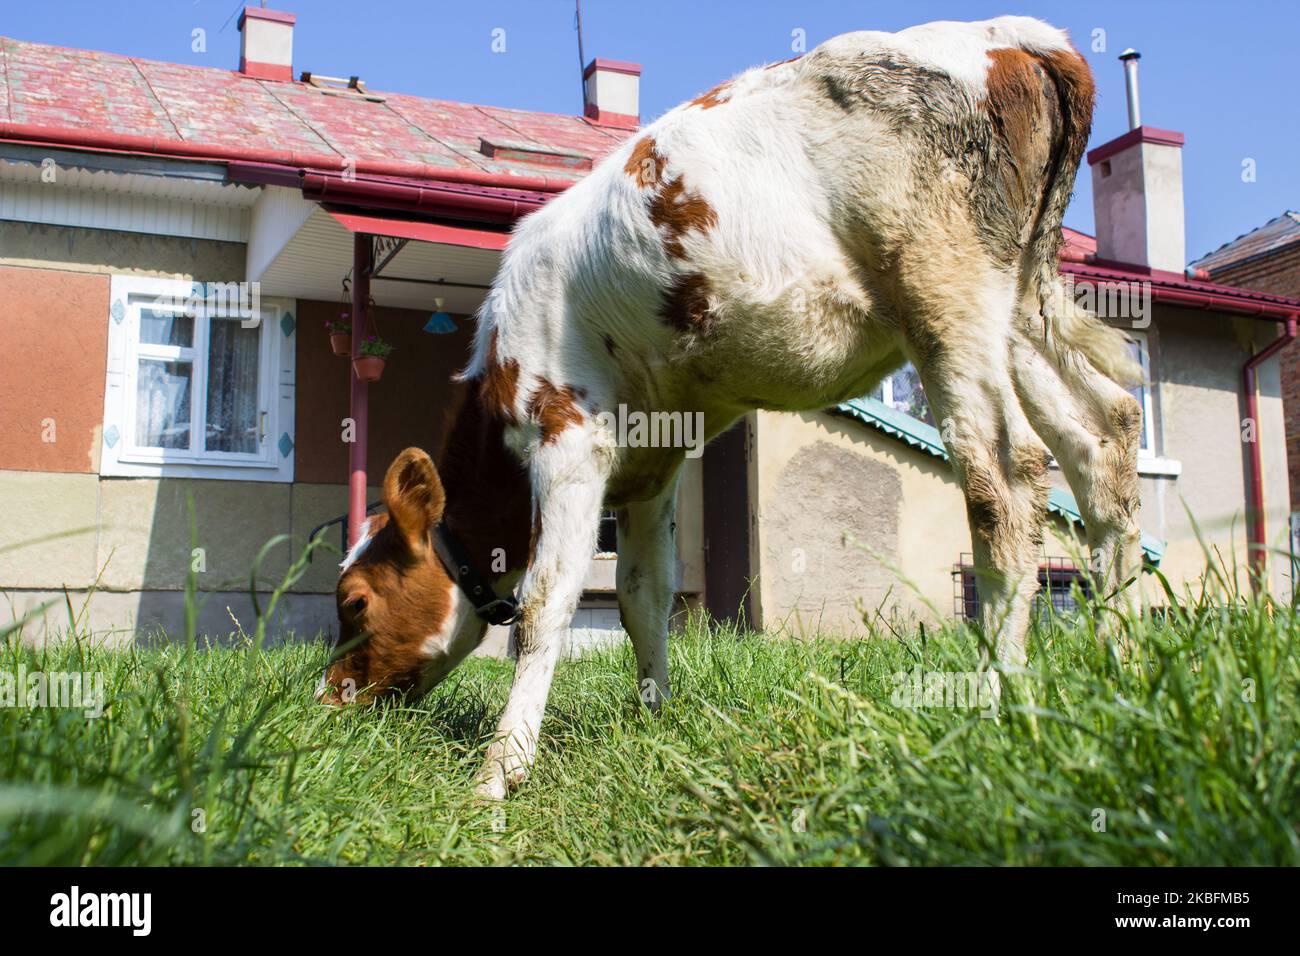 white with orange spots calf grazing in the yard Stock Photo